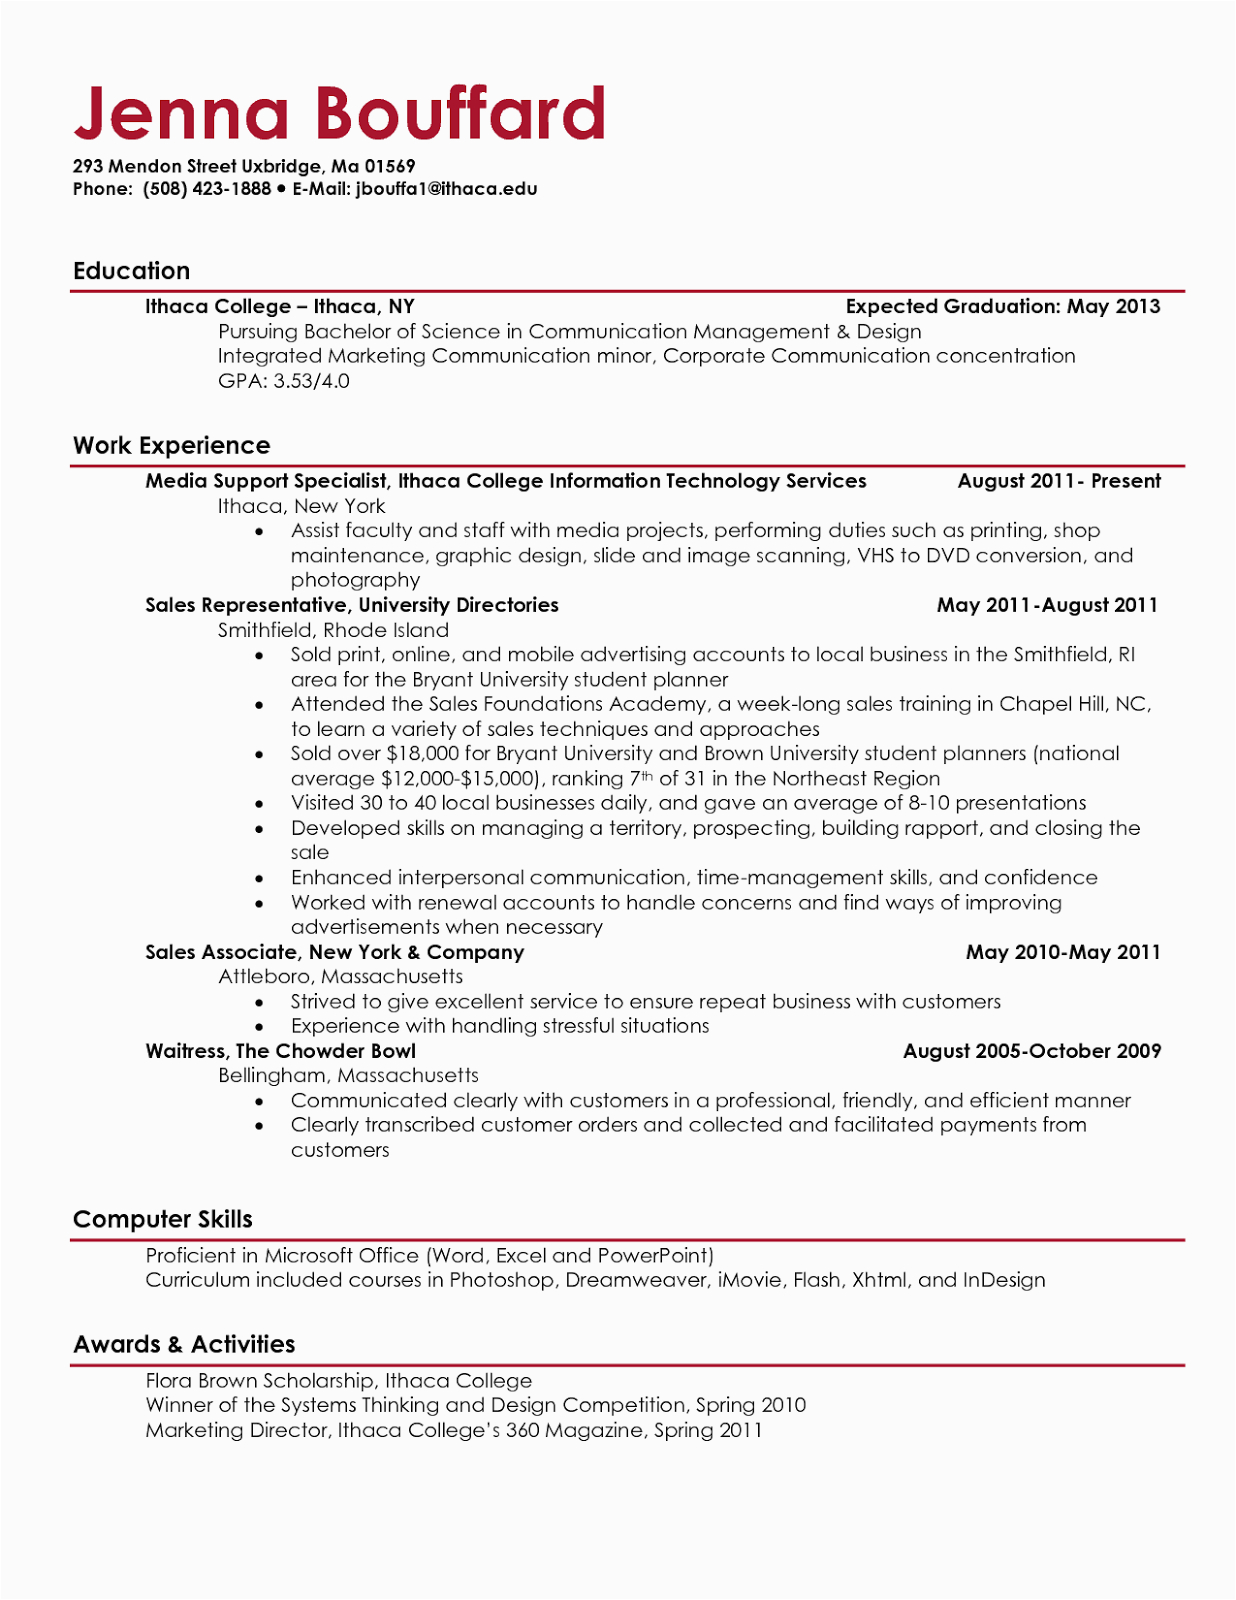 Resume Sample for A College Student Samples Of Resumes for College Students